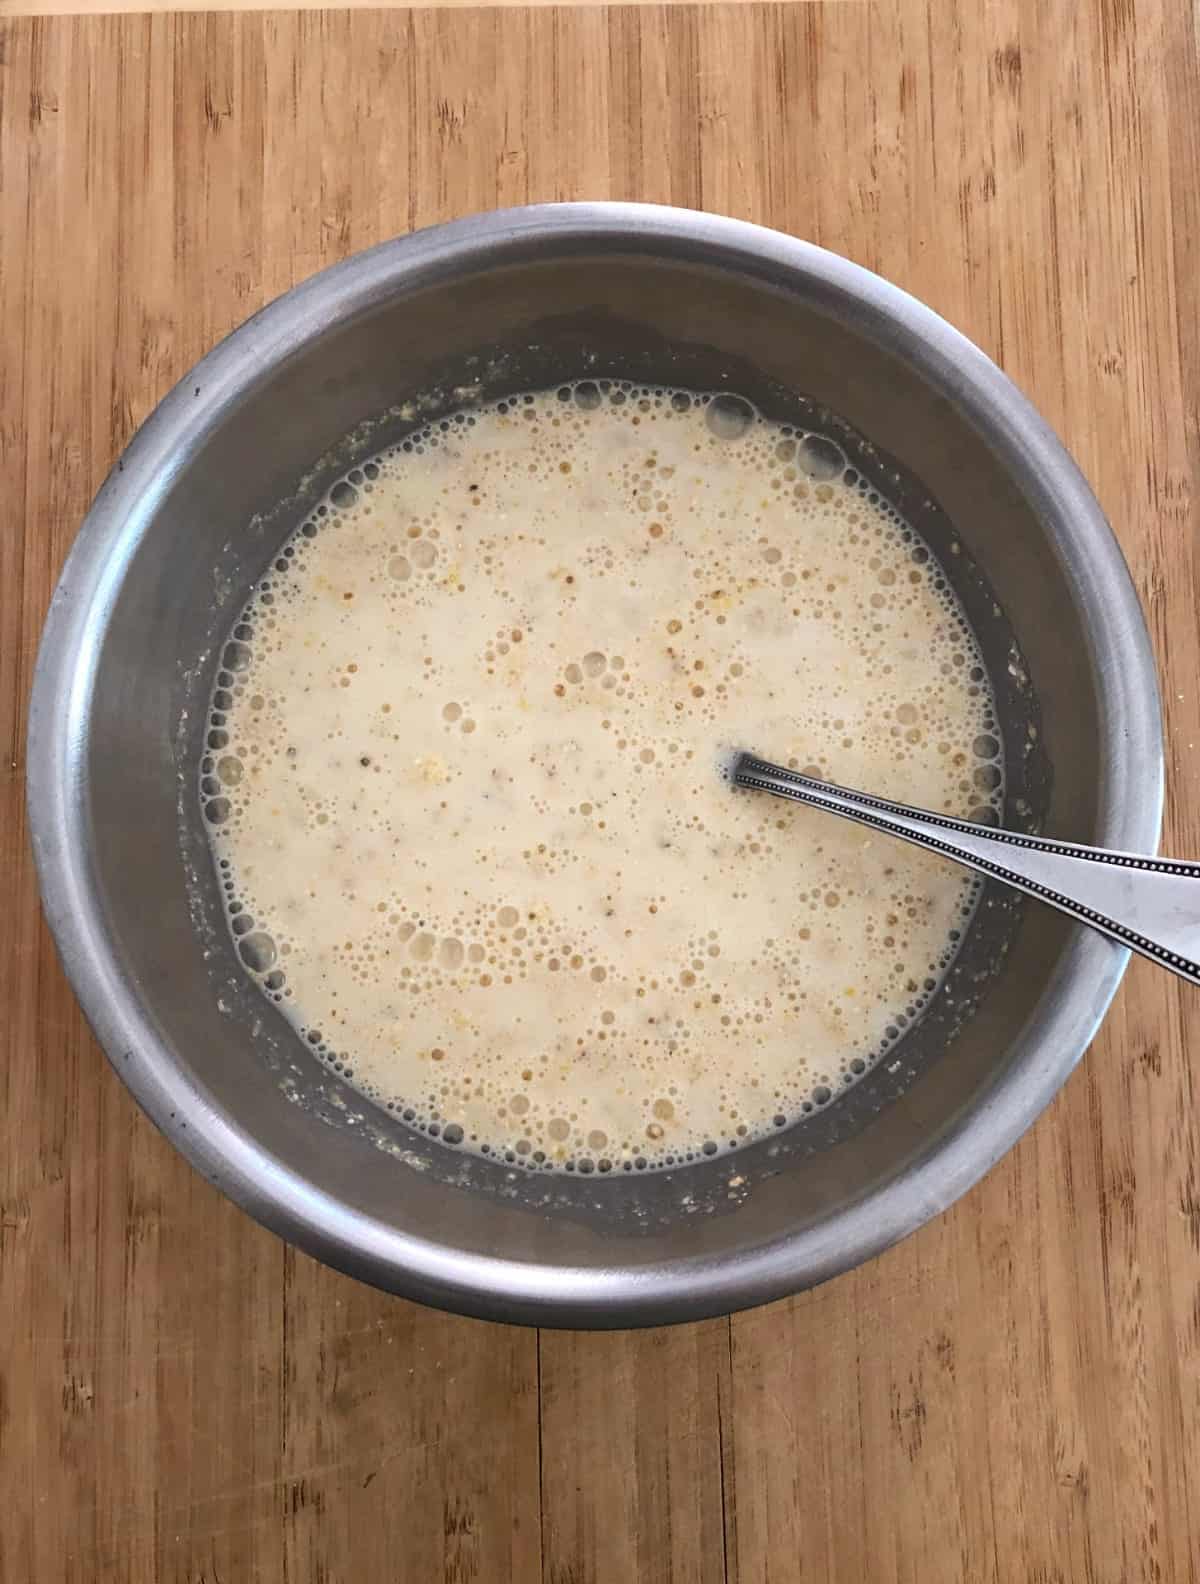 Mixing together cornmeal, milk and egg in stainless mixing bowl.